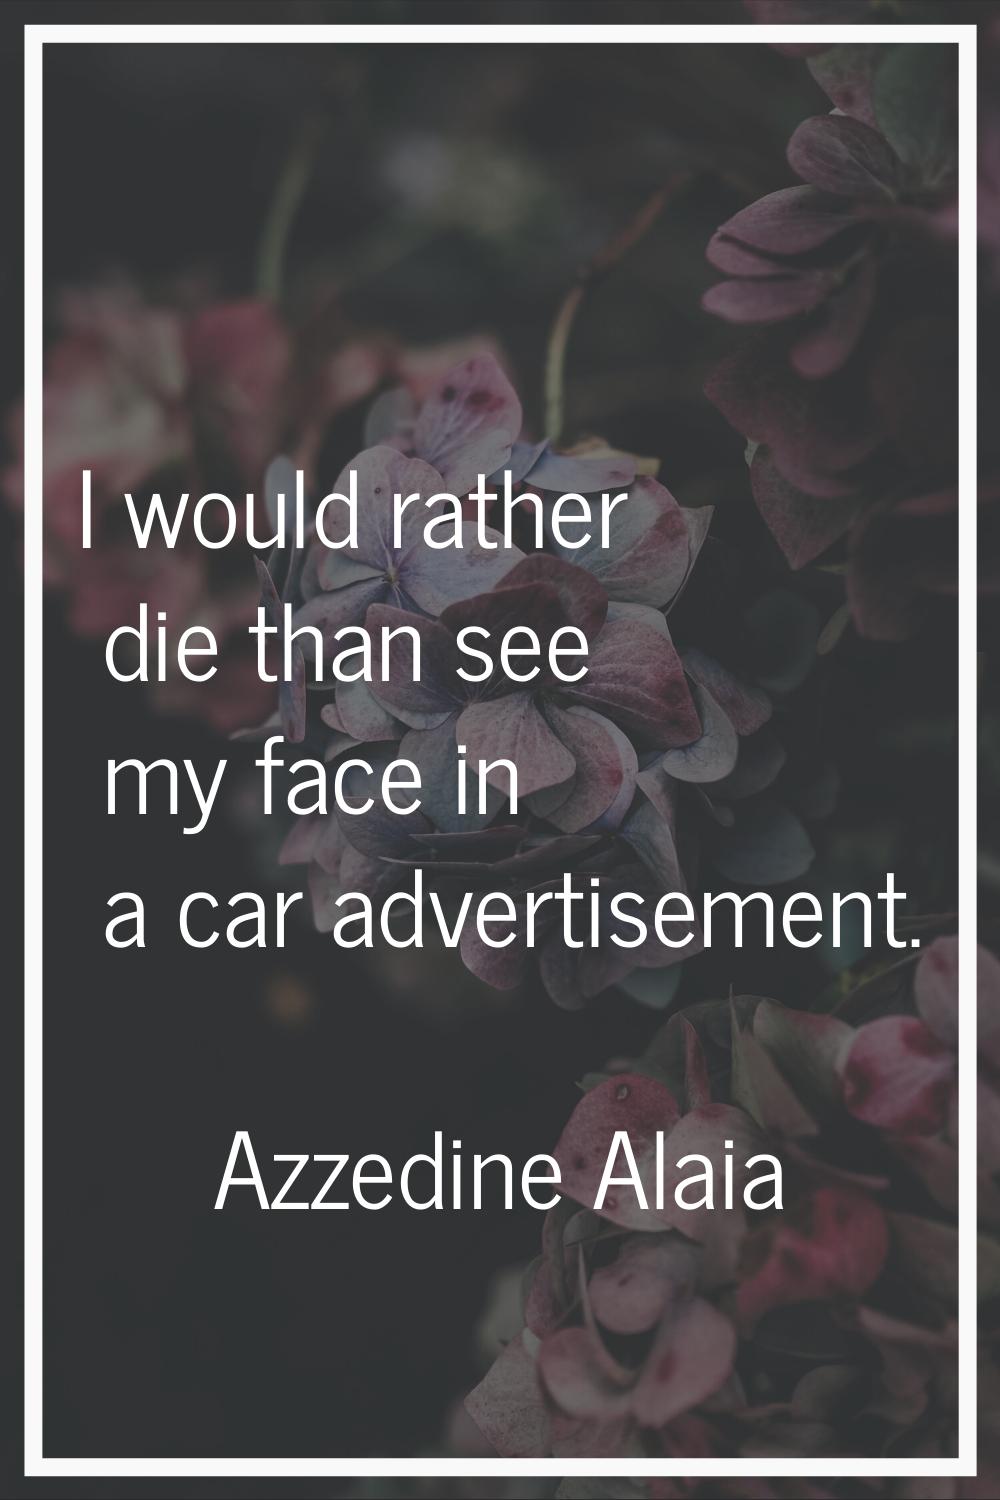 I would rather die than see my face in a car advertisement.